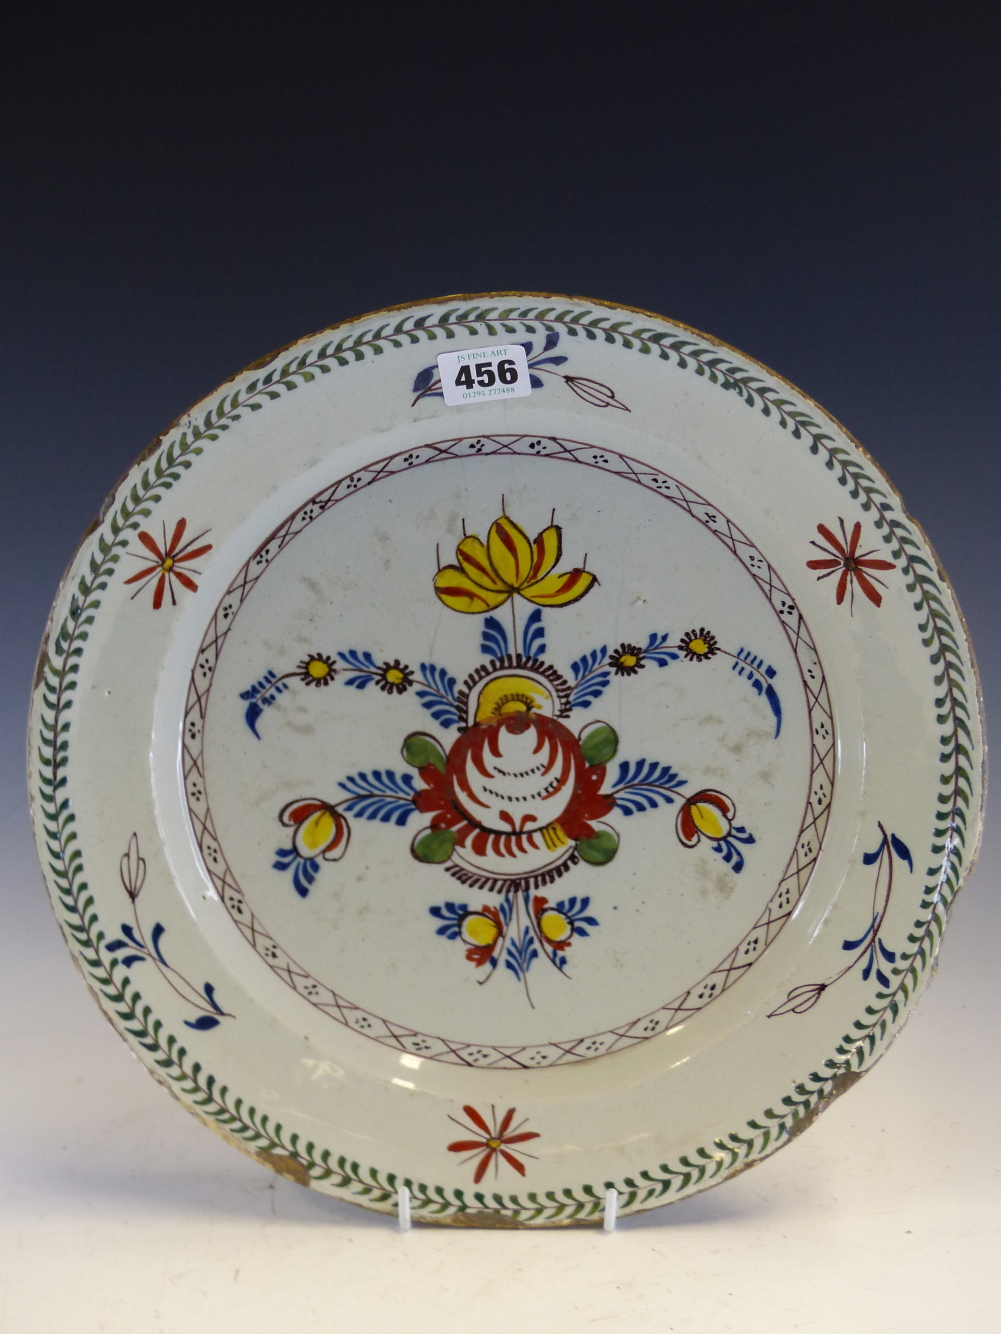 A PAIR OF MID 18th C. ENGLISH POLYCHROME DELFT DISHES PAINTED WITH CENTRAL SPRAYS OF FLOWERS